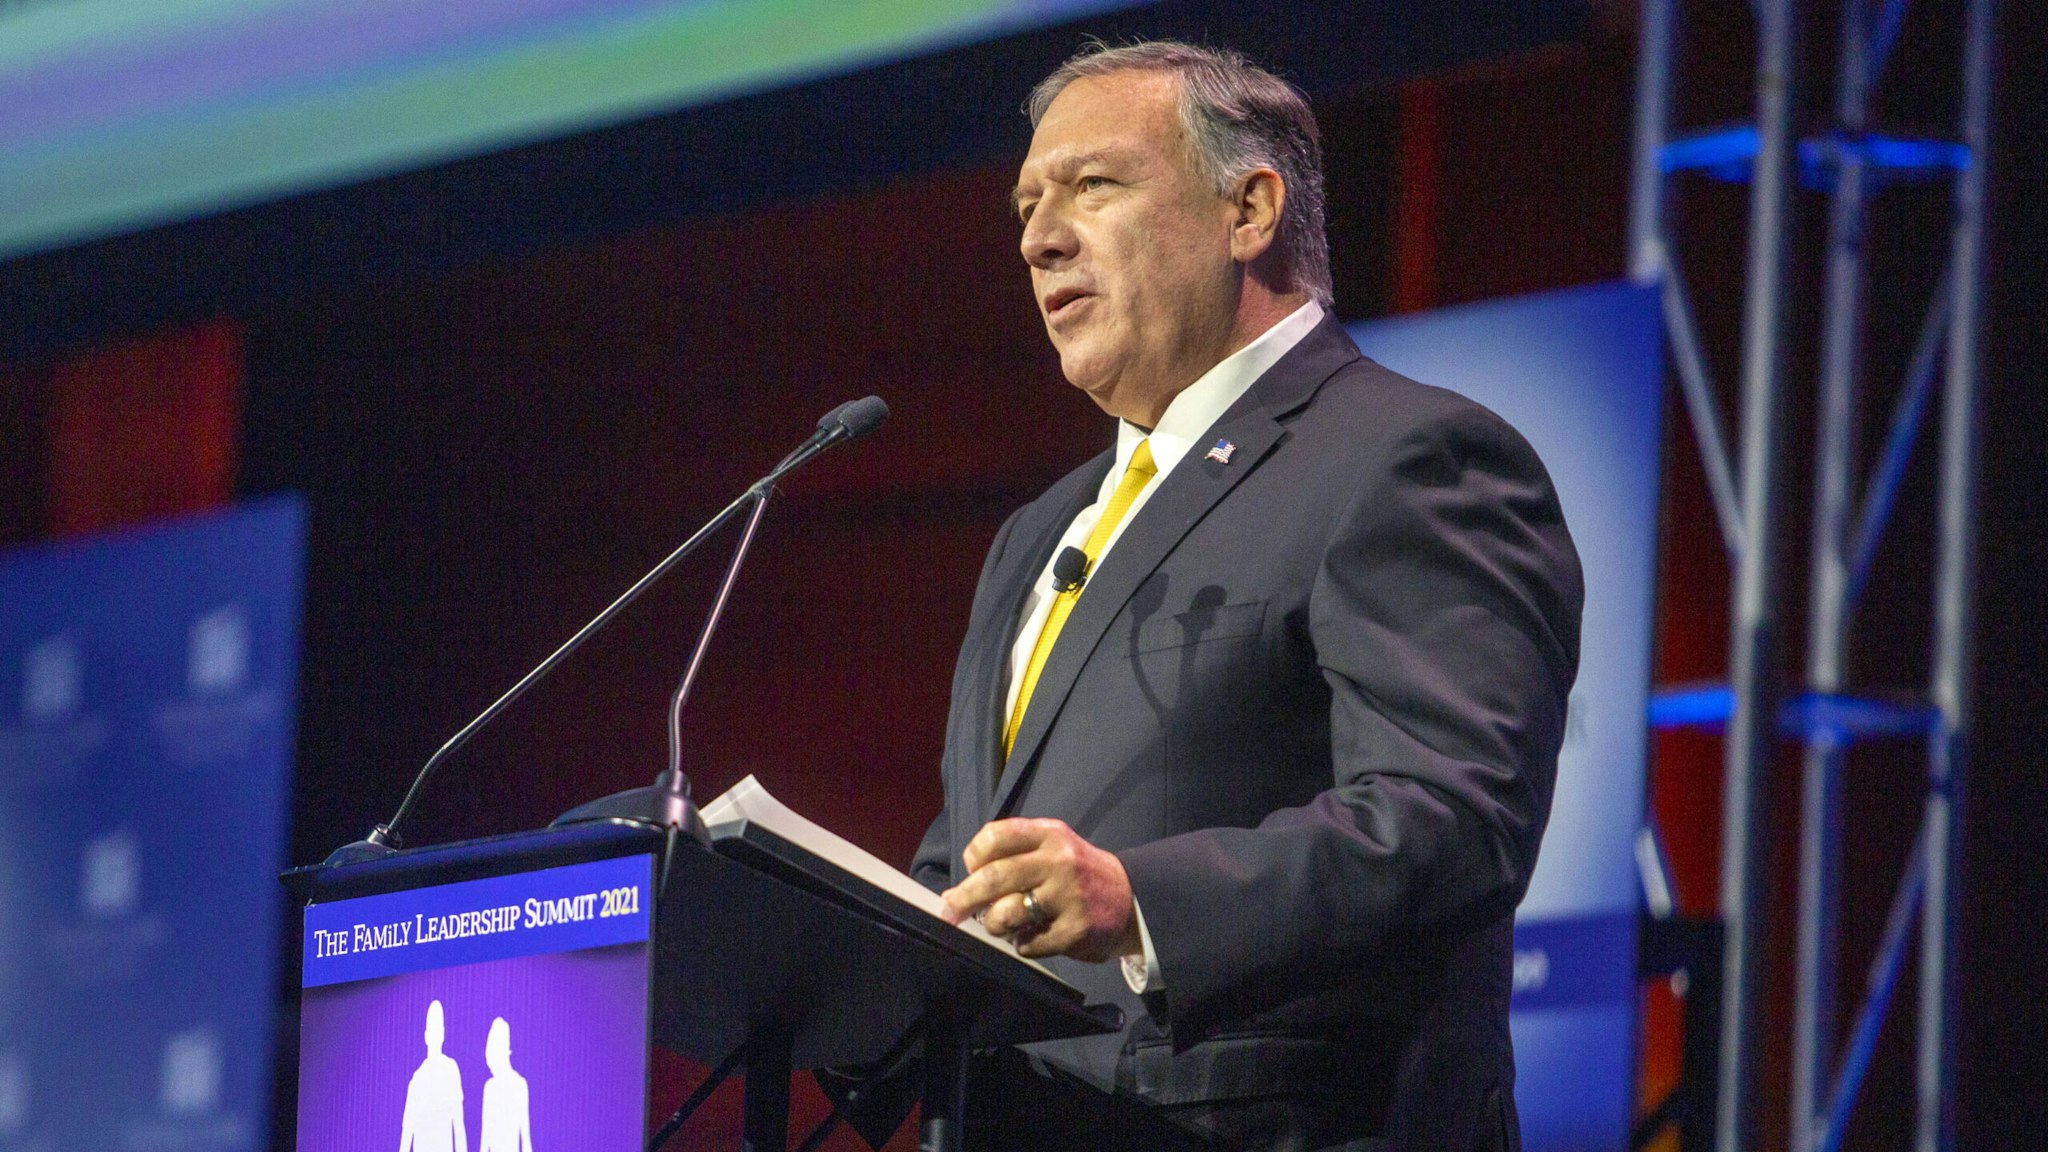 Michael Pompeo, former U.S. secretary of state, speaks during the FAMiLY Leader summit in Des Moines, Iowa, U.S., on Friday, July 16, 2021. Former Vice President Mike Pence is headlining the evangelical group's 10th annual leadership summit.